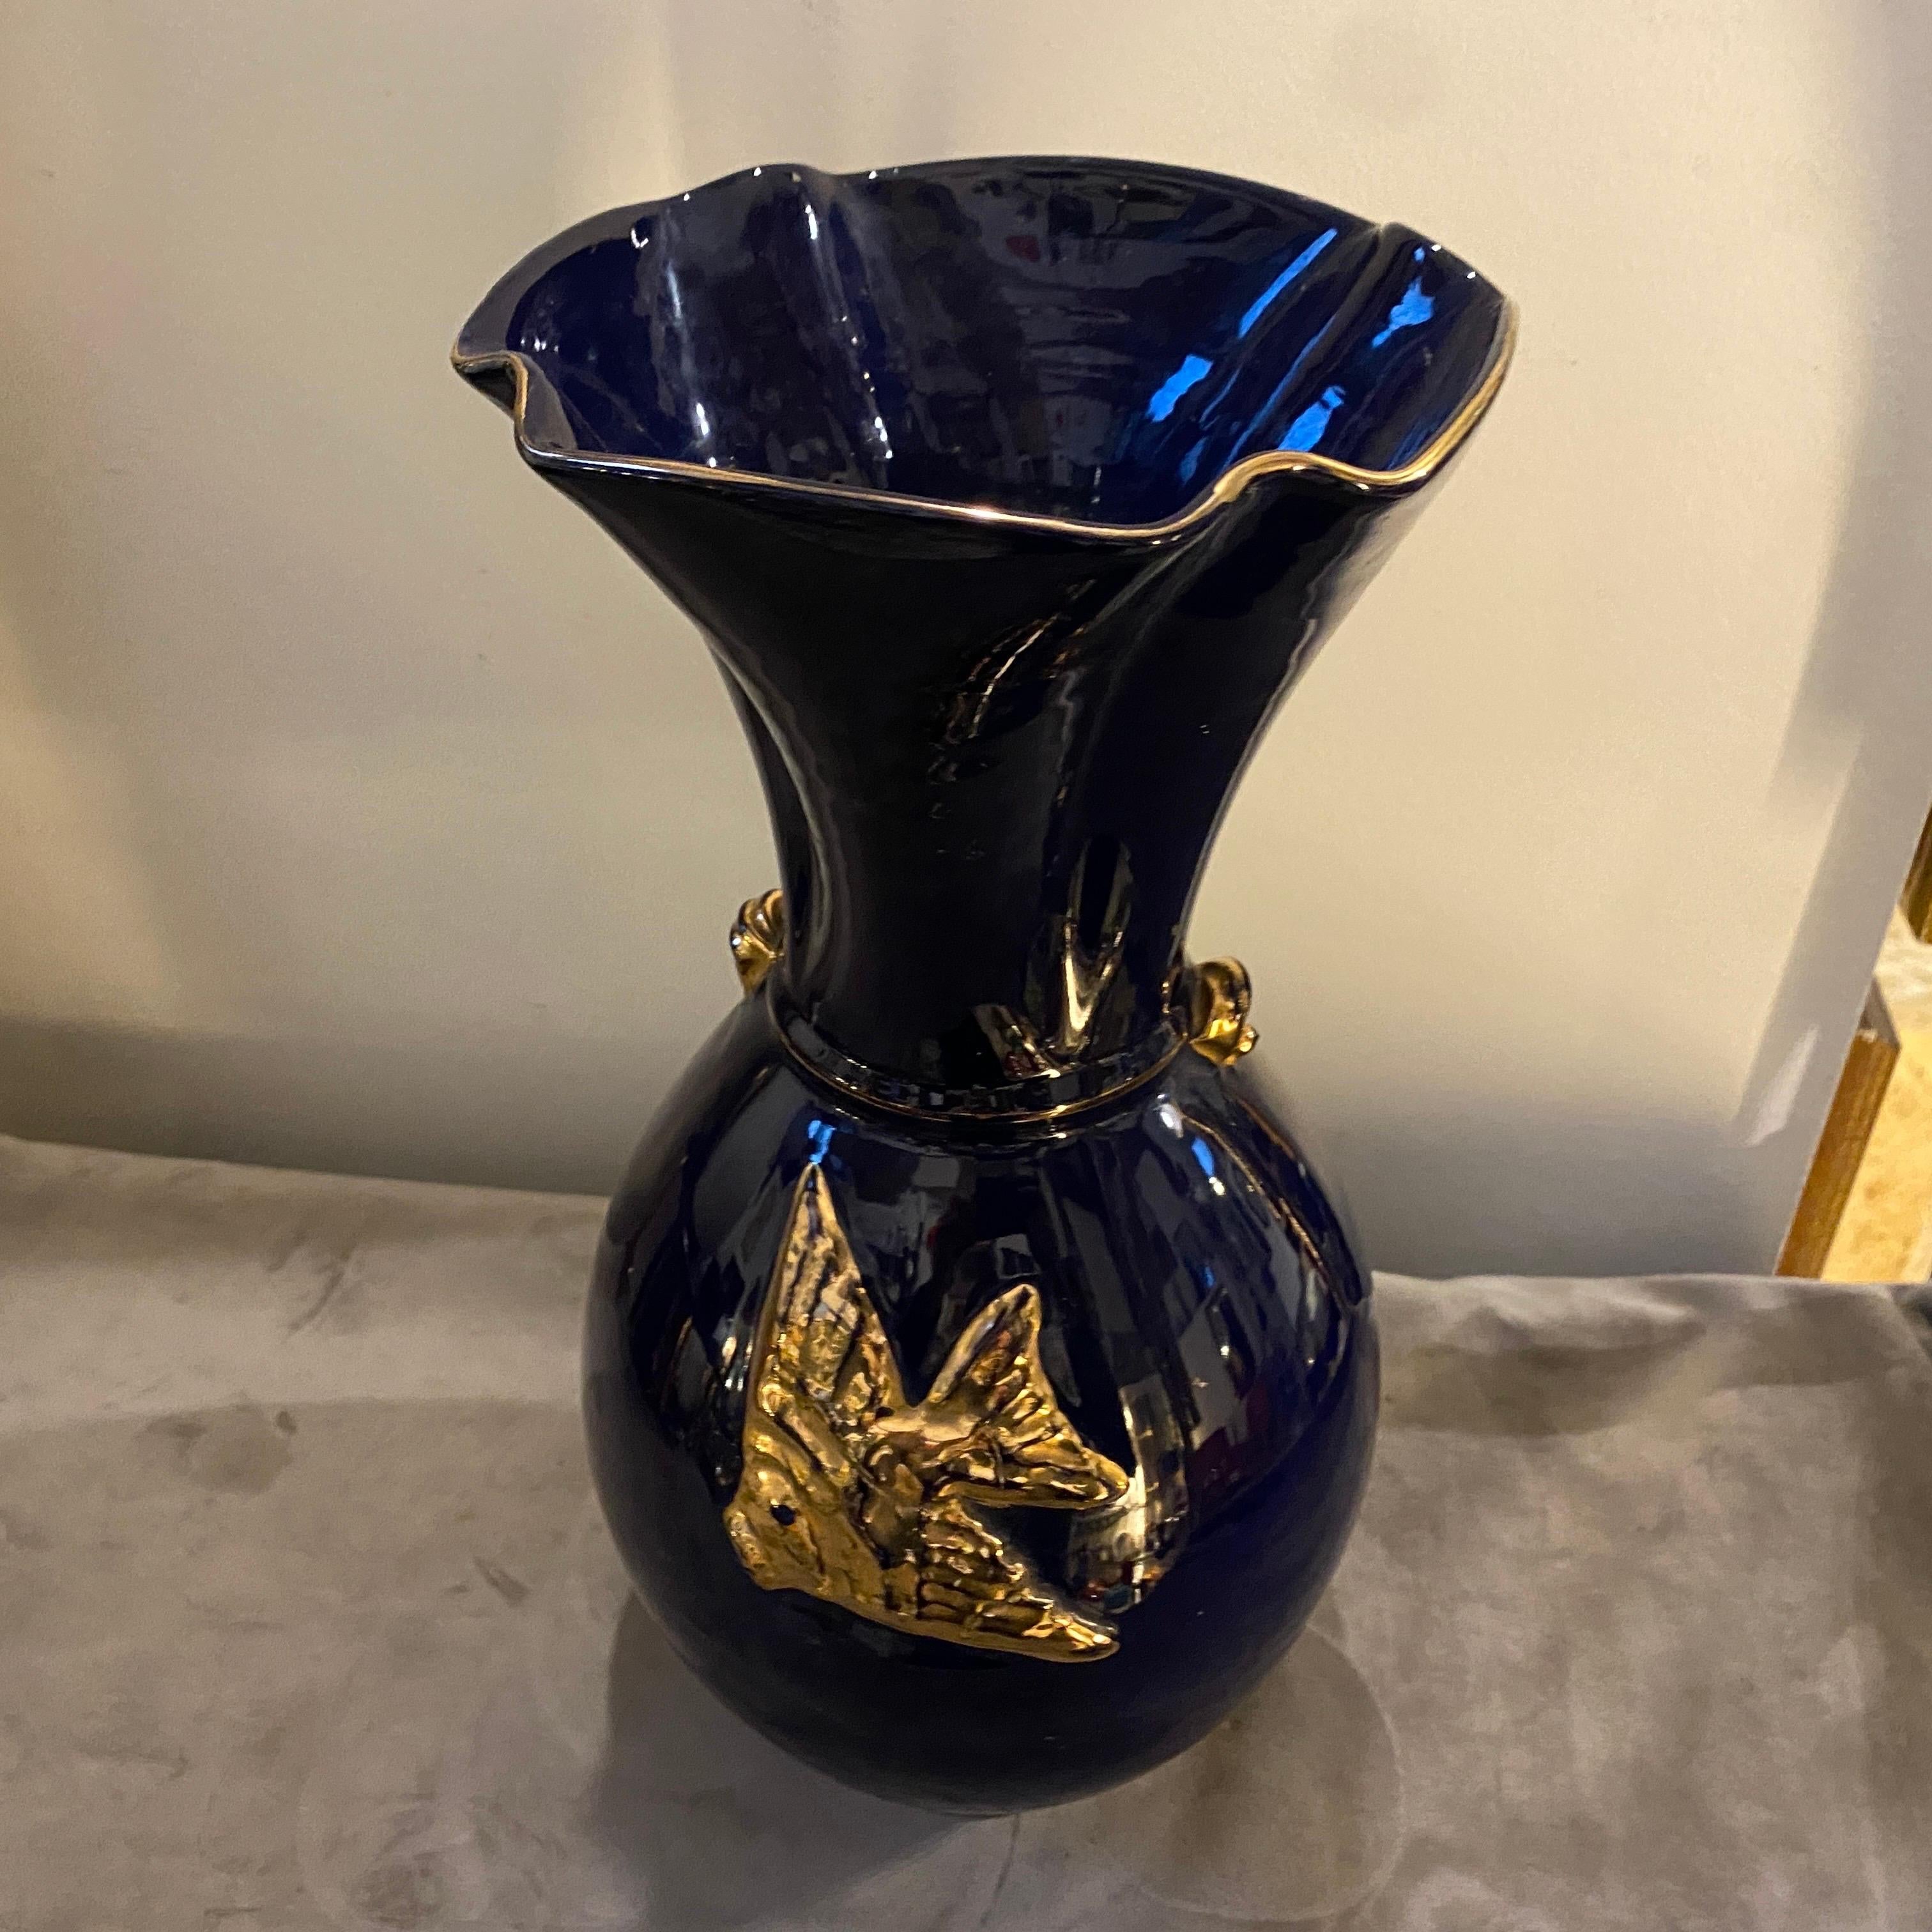 Hand-Crafted 1950s Mid-Century Modern Blue and Gold Ceramic Italian Vase by Icap For Sale